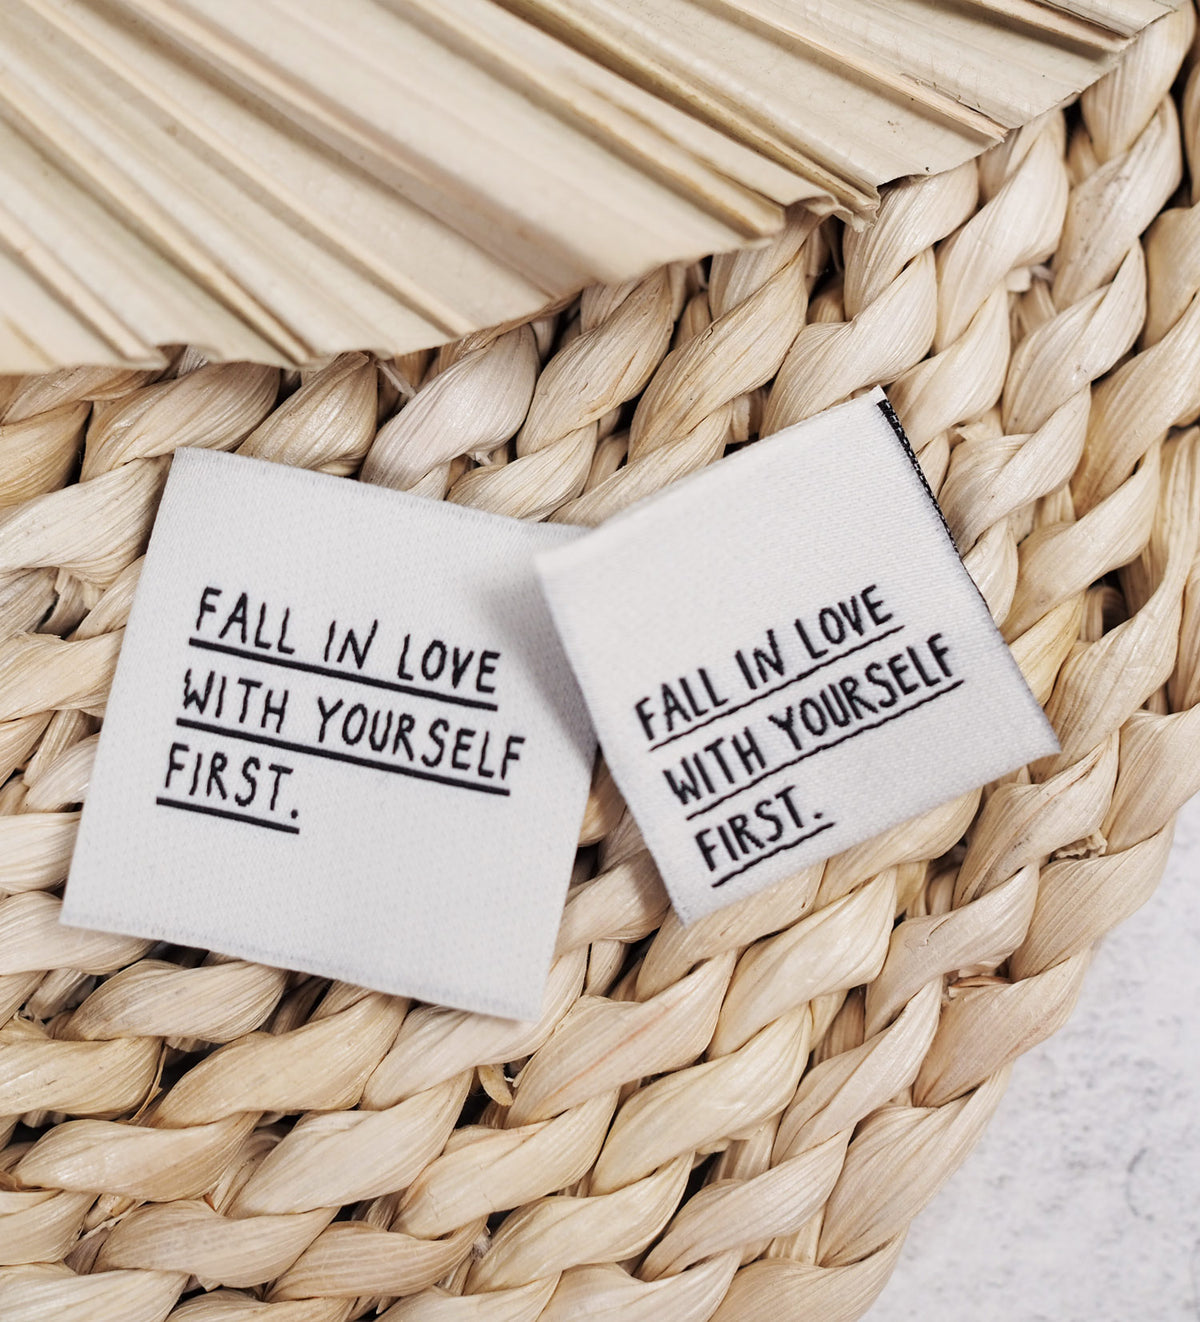 Weblabel *fall in love with yourself first* weiß - 4er Pack